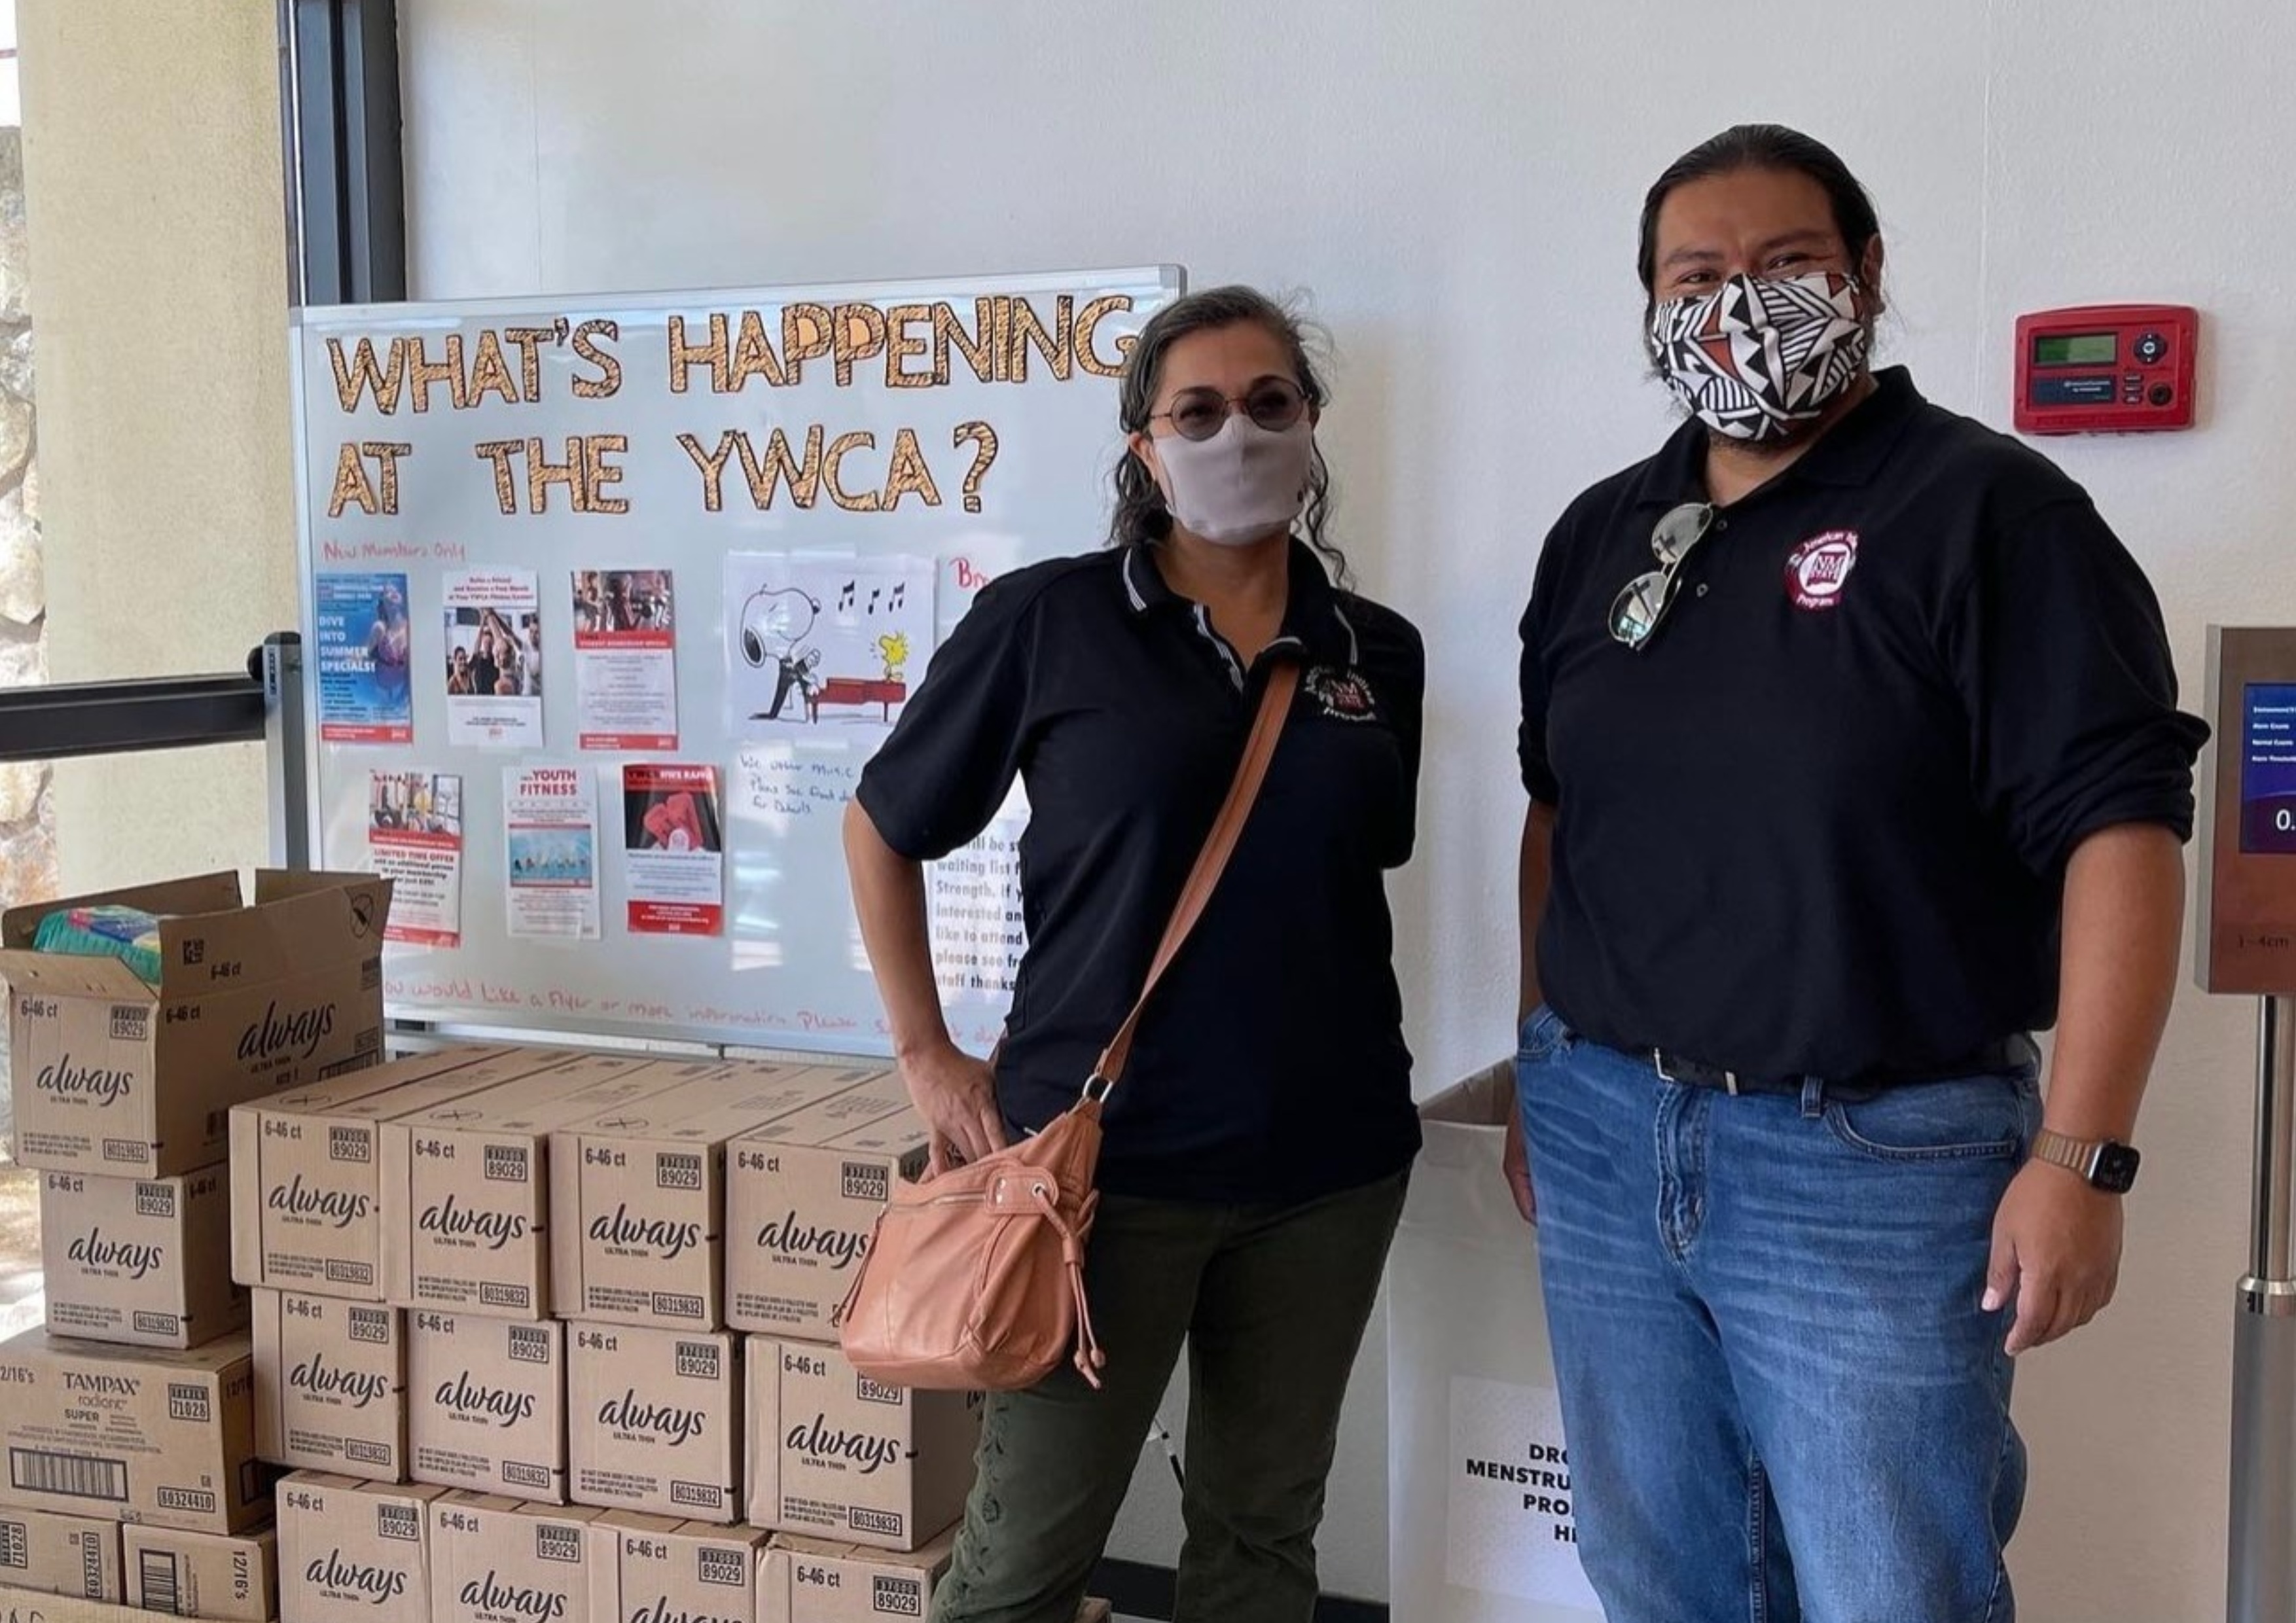 AIP Staff Donating to YWCA. Two masked individuals standing in front of a whiteboard with "WHAT'S HAPPENING AT THE YWCA?" written on it, and a stack of boxes labeled "Always."